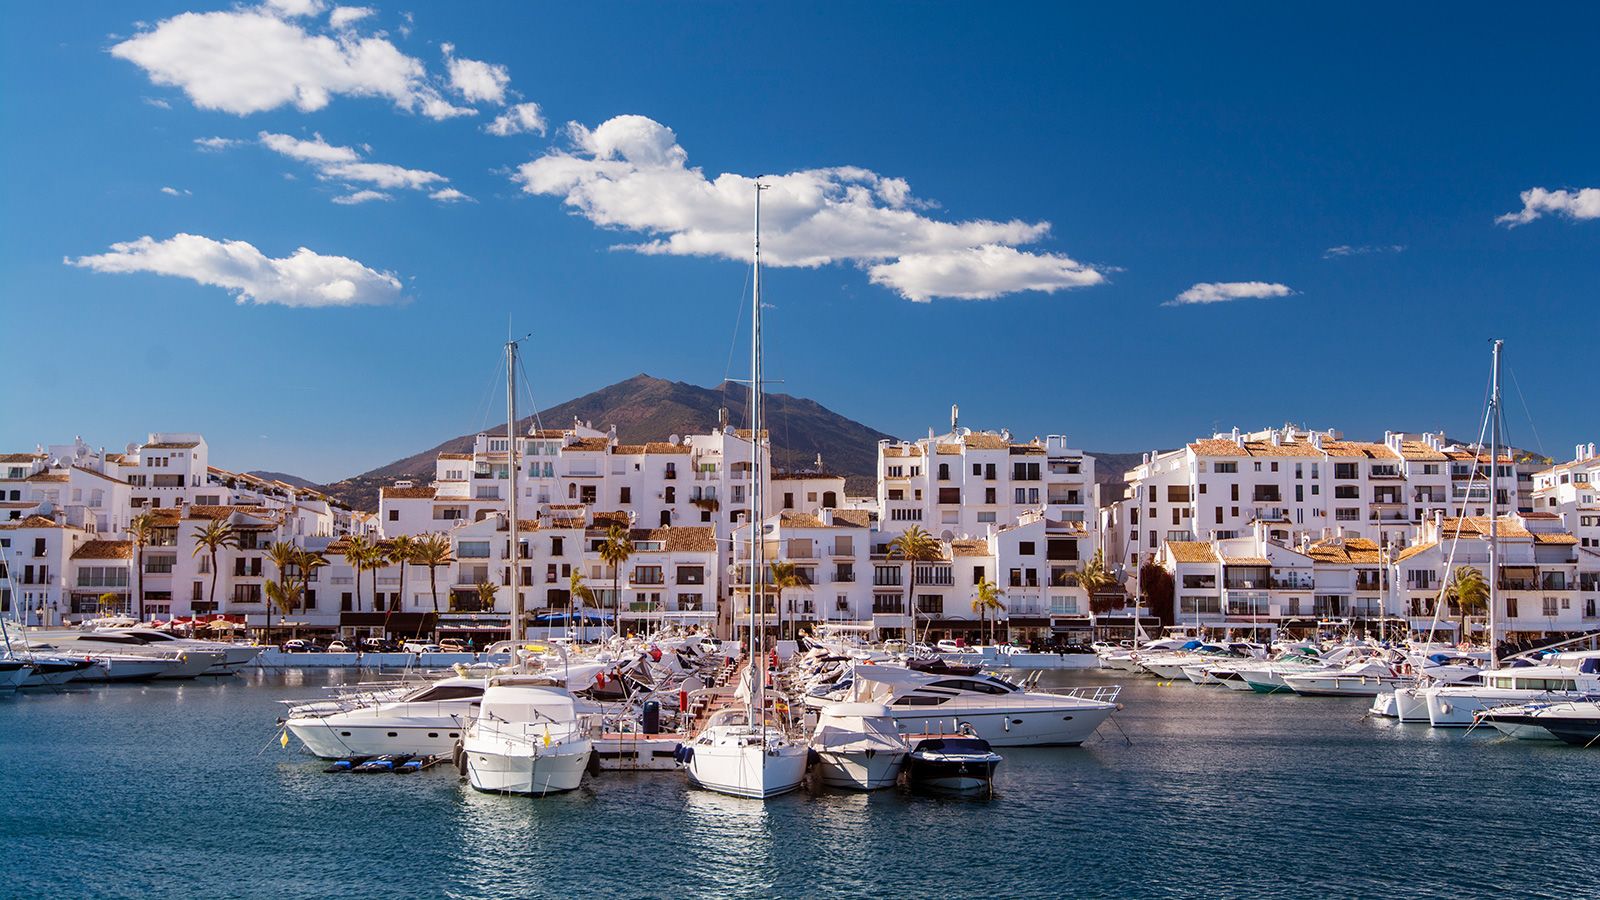 Luxury shops at the exclusive yacht harbor of Puerto Banus, Marbella,  News Photo - Getty Images